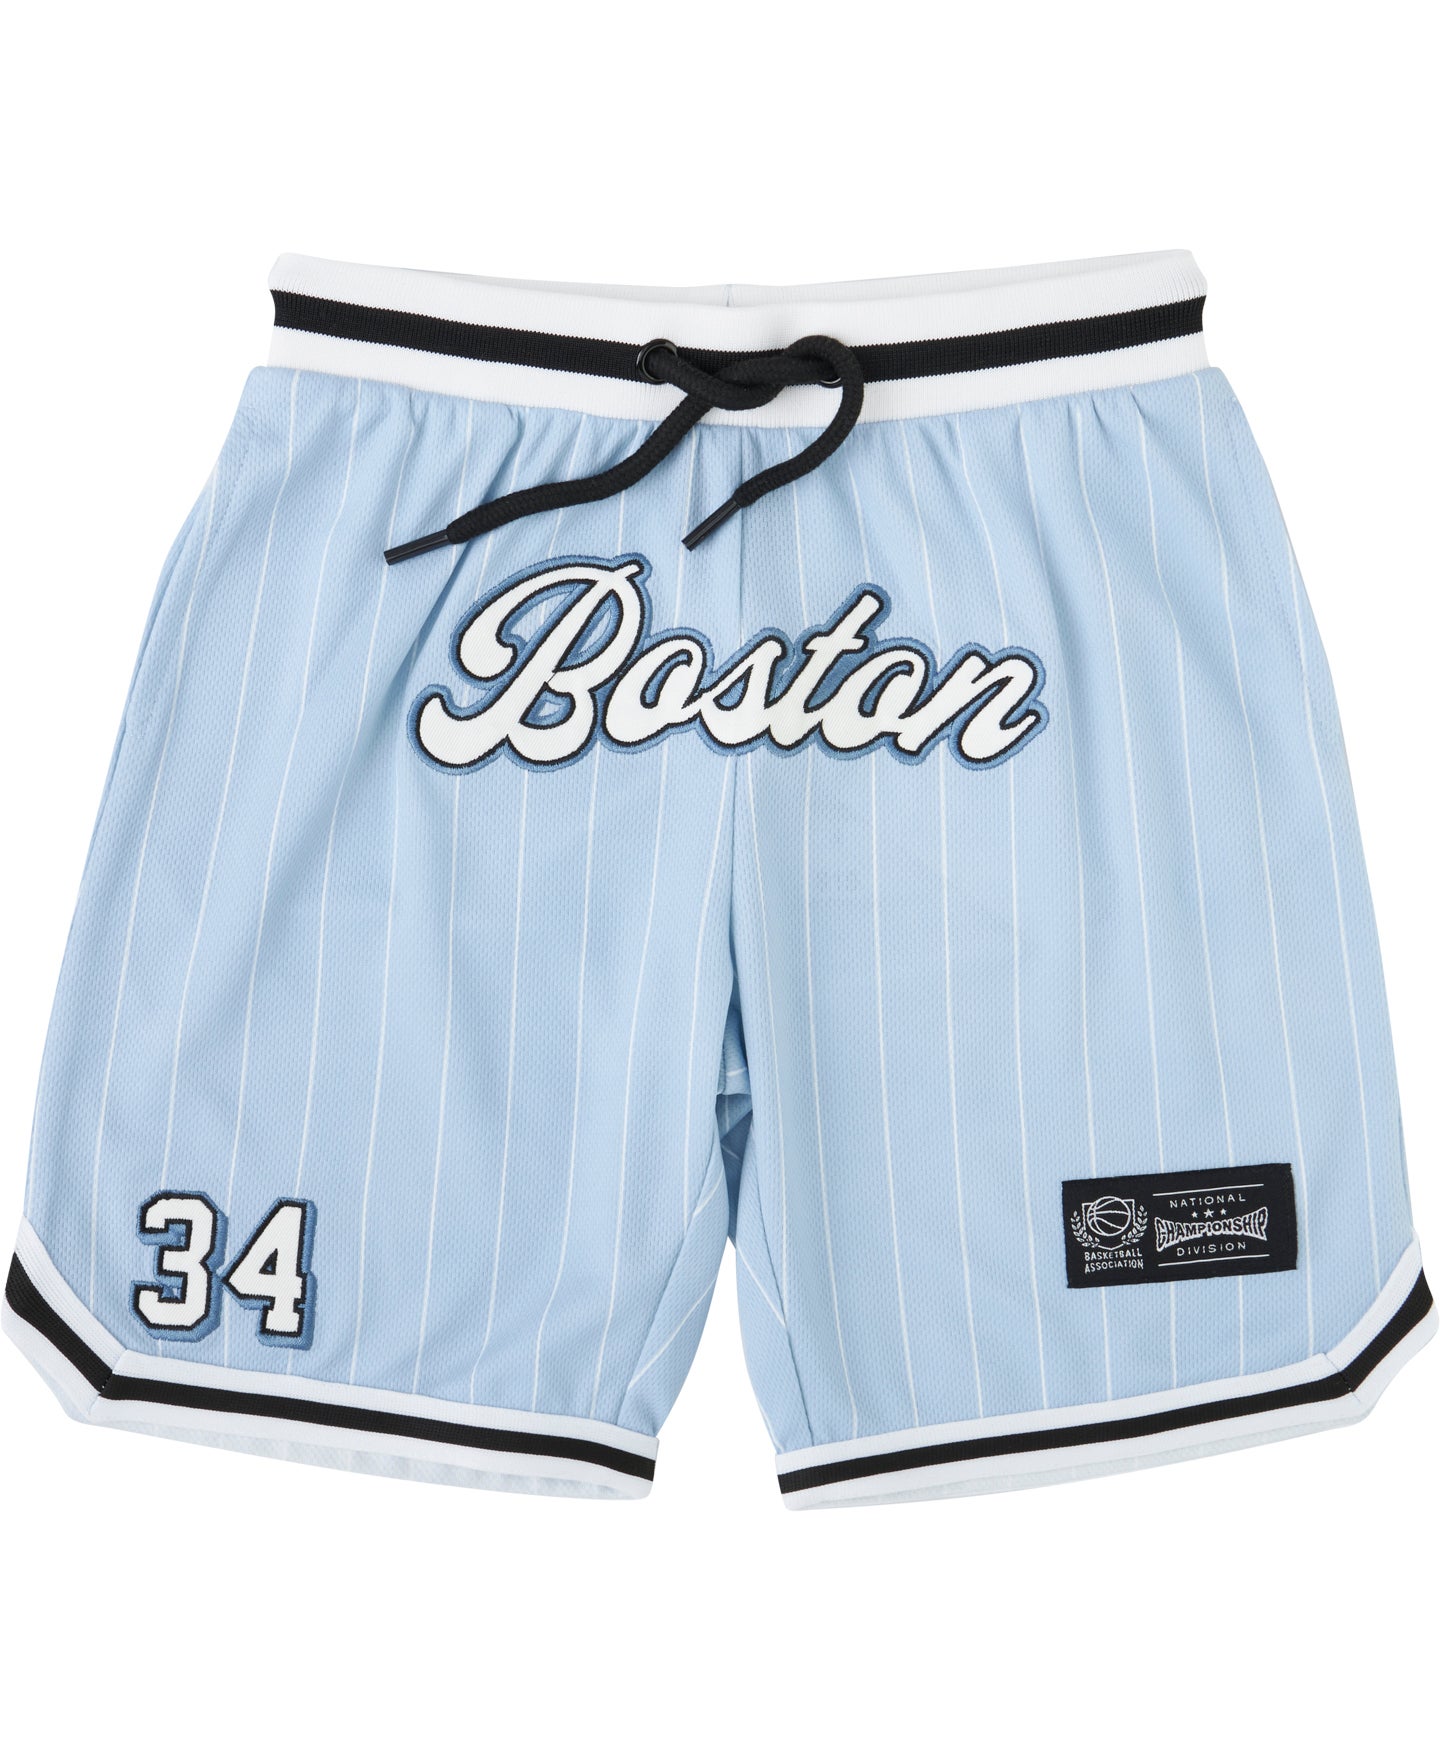 https://www.postie.co.nz/content/products/little-kids-mesh-basketball-short-blue-boston-a-outfit-820015.jpg